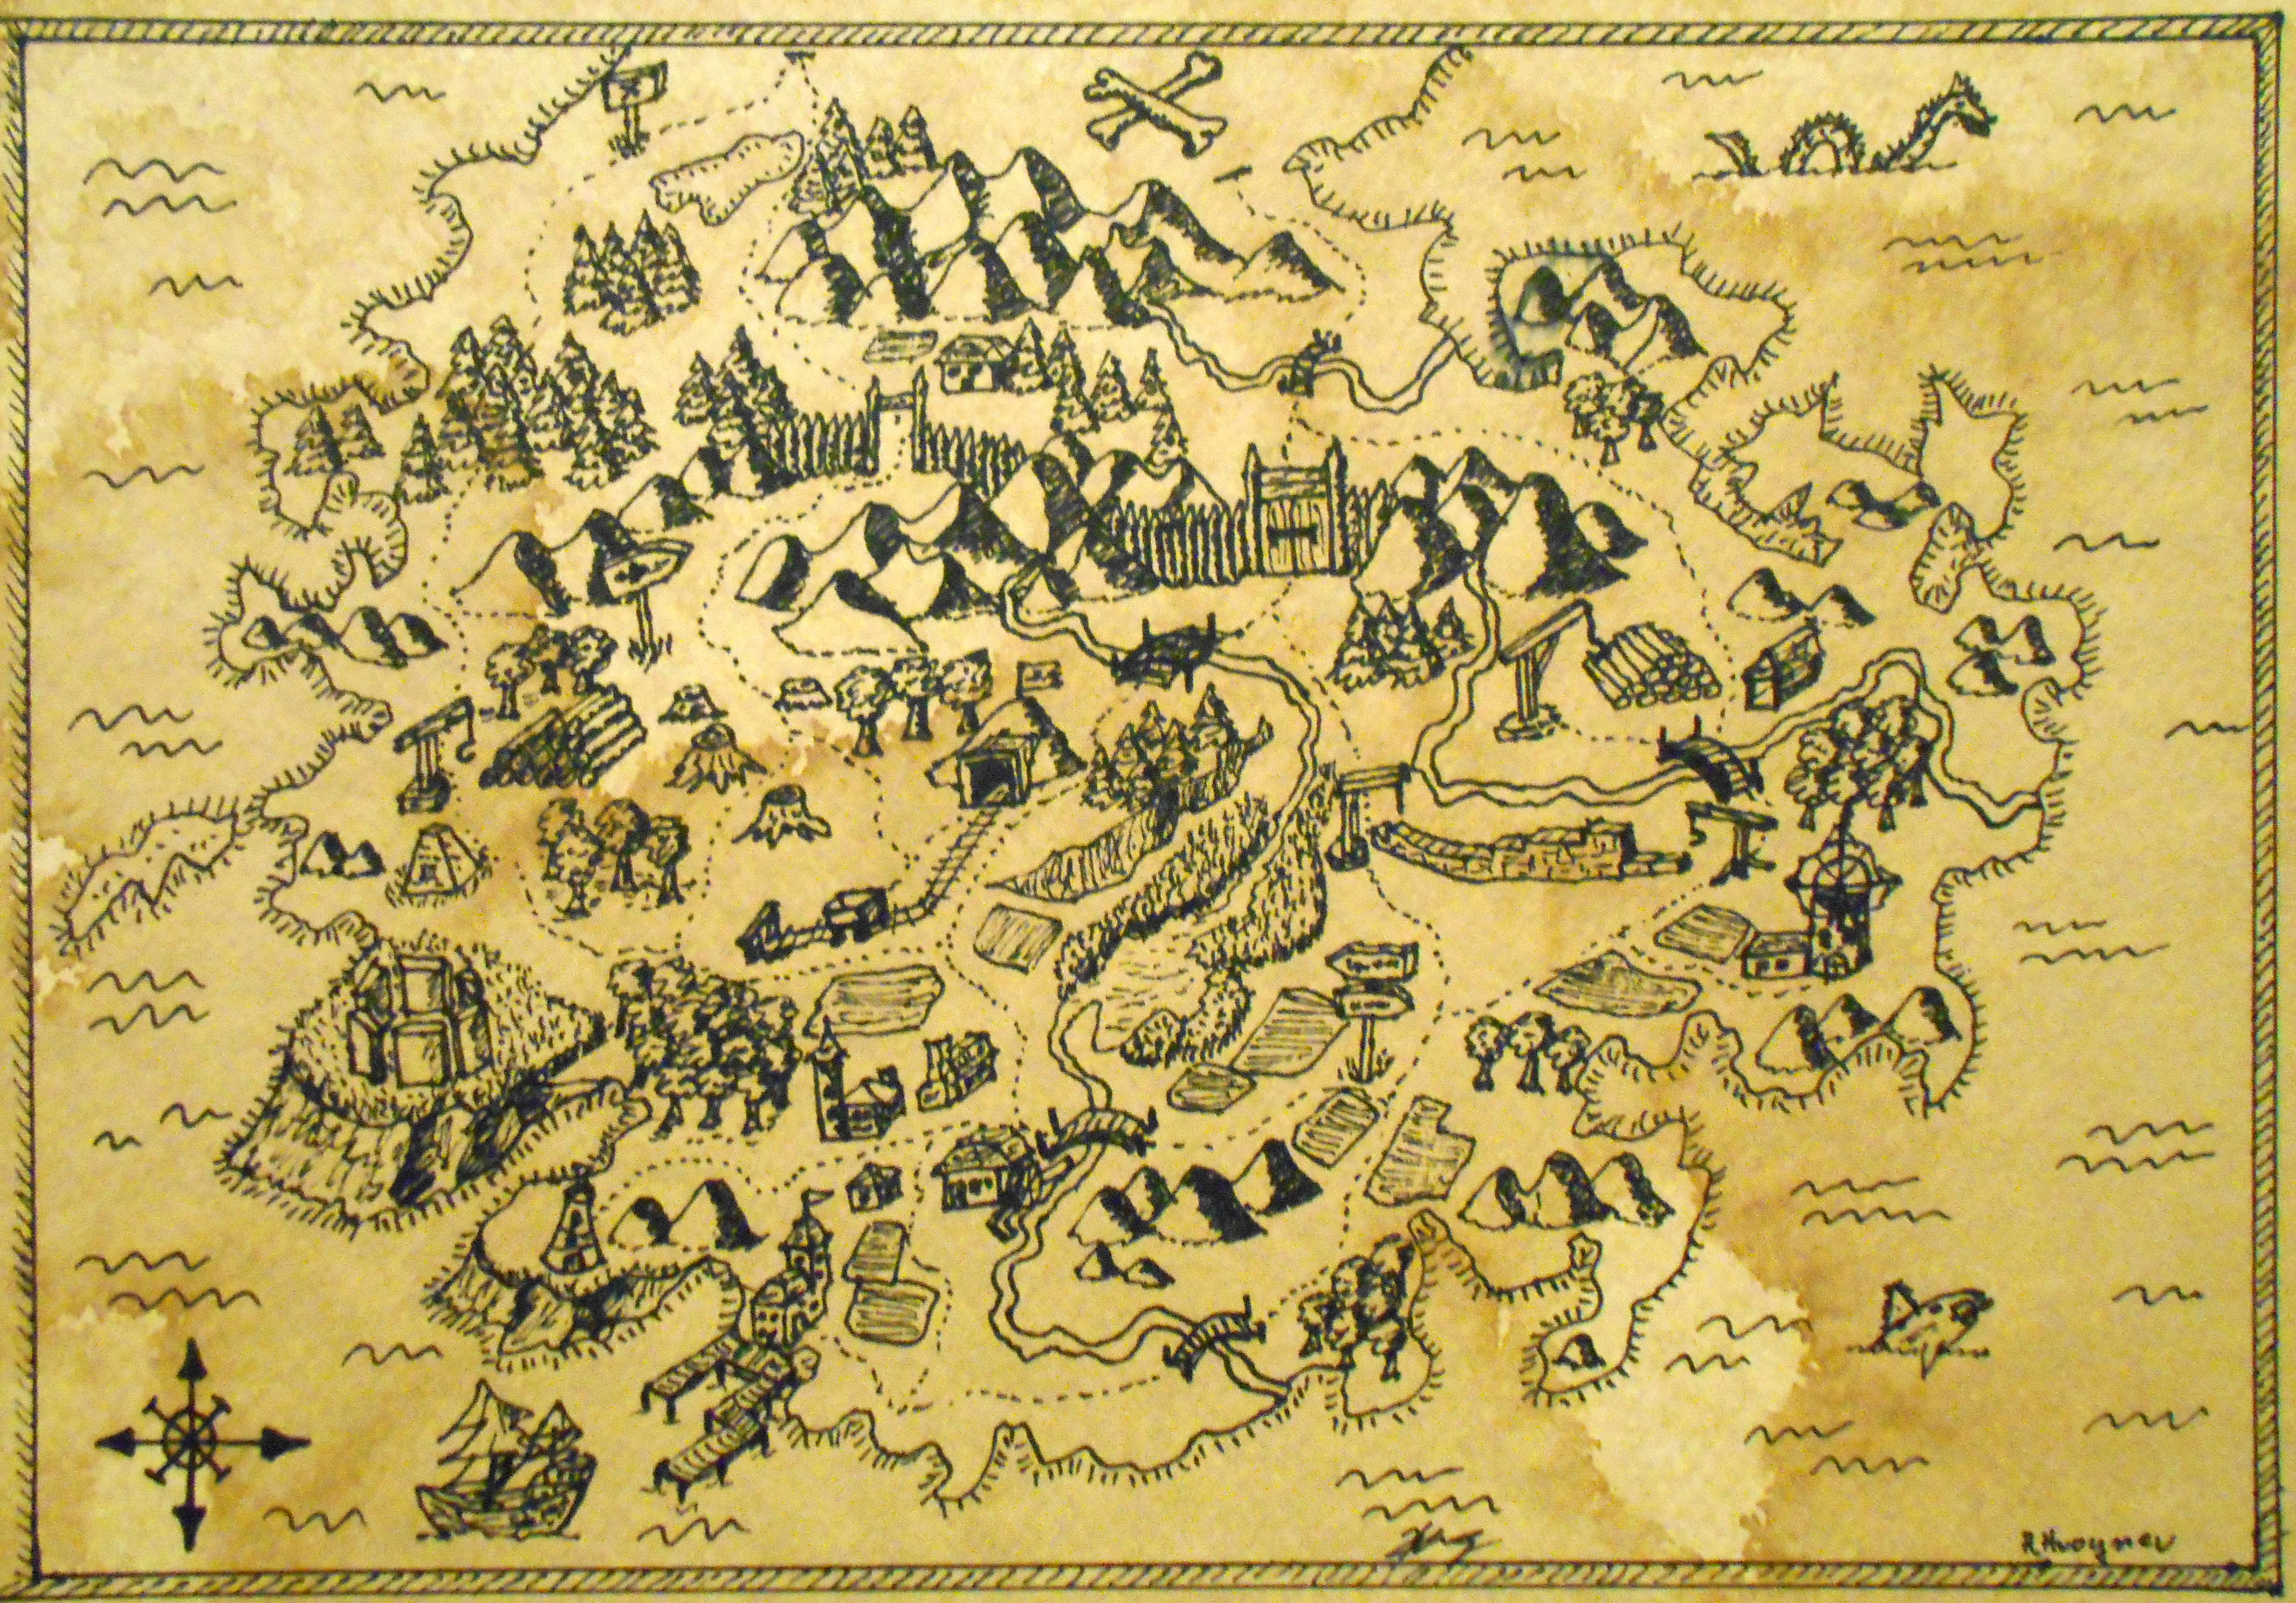 Hand-drawn pirate fantasy map on a brown vintage paper of a part of a continent with forests, mountains, villages and different fortresses